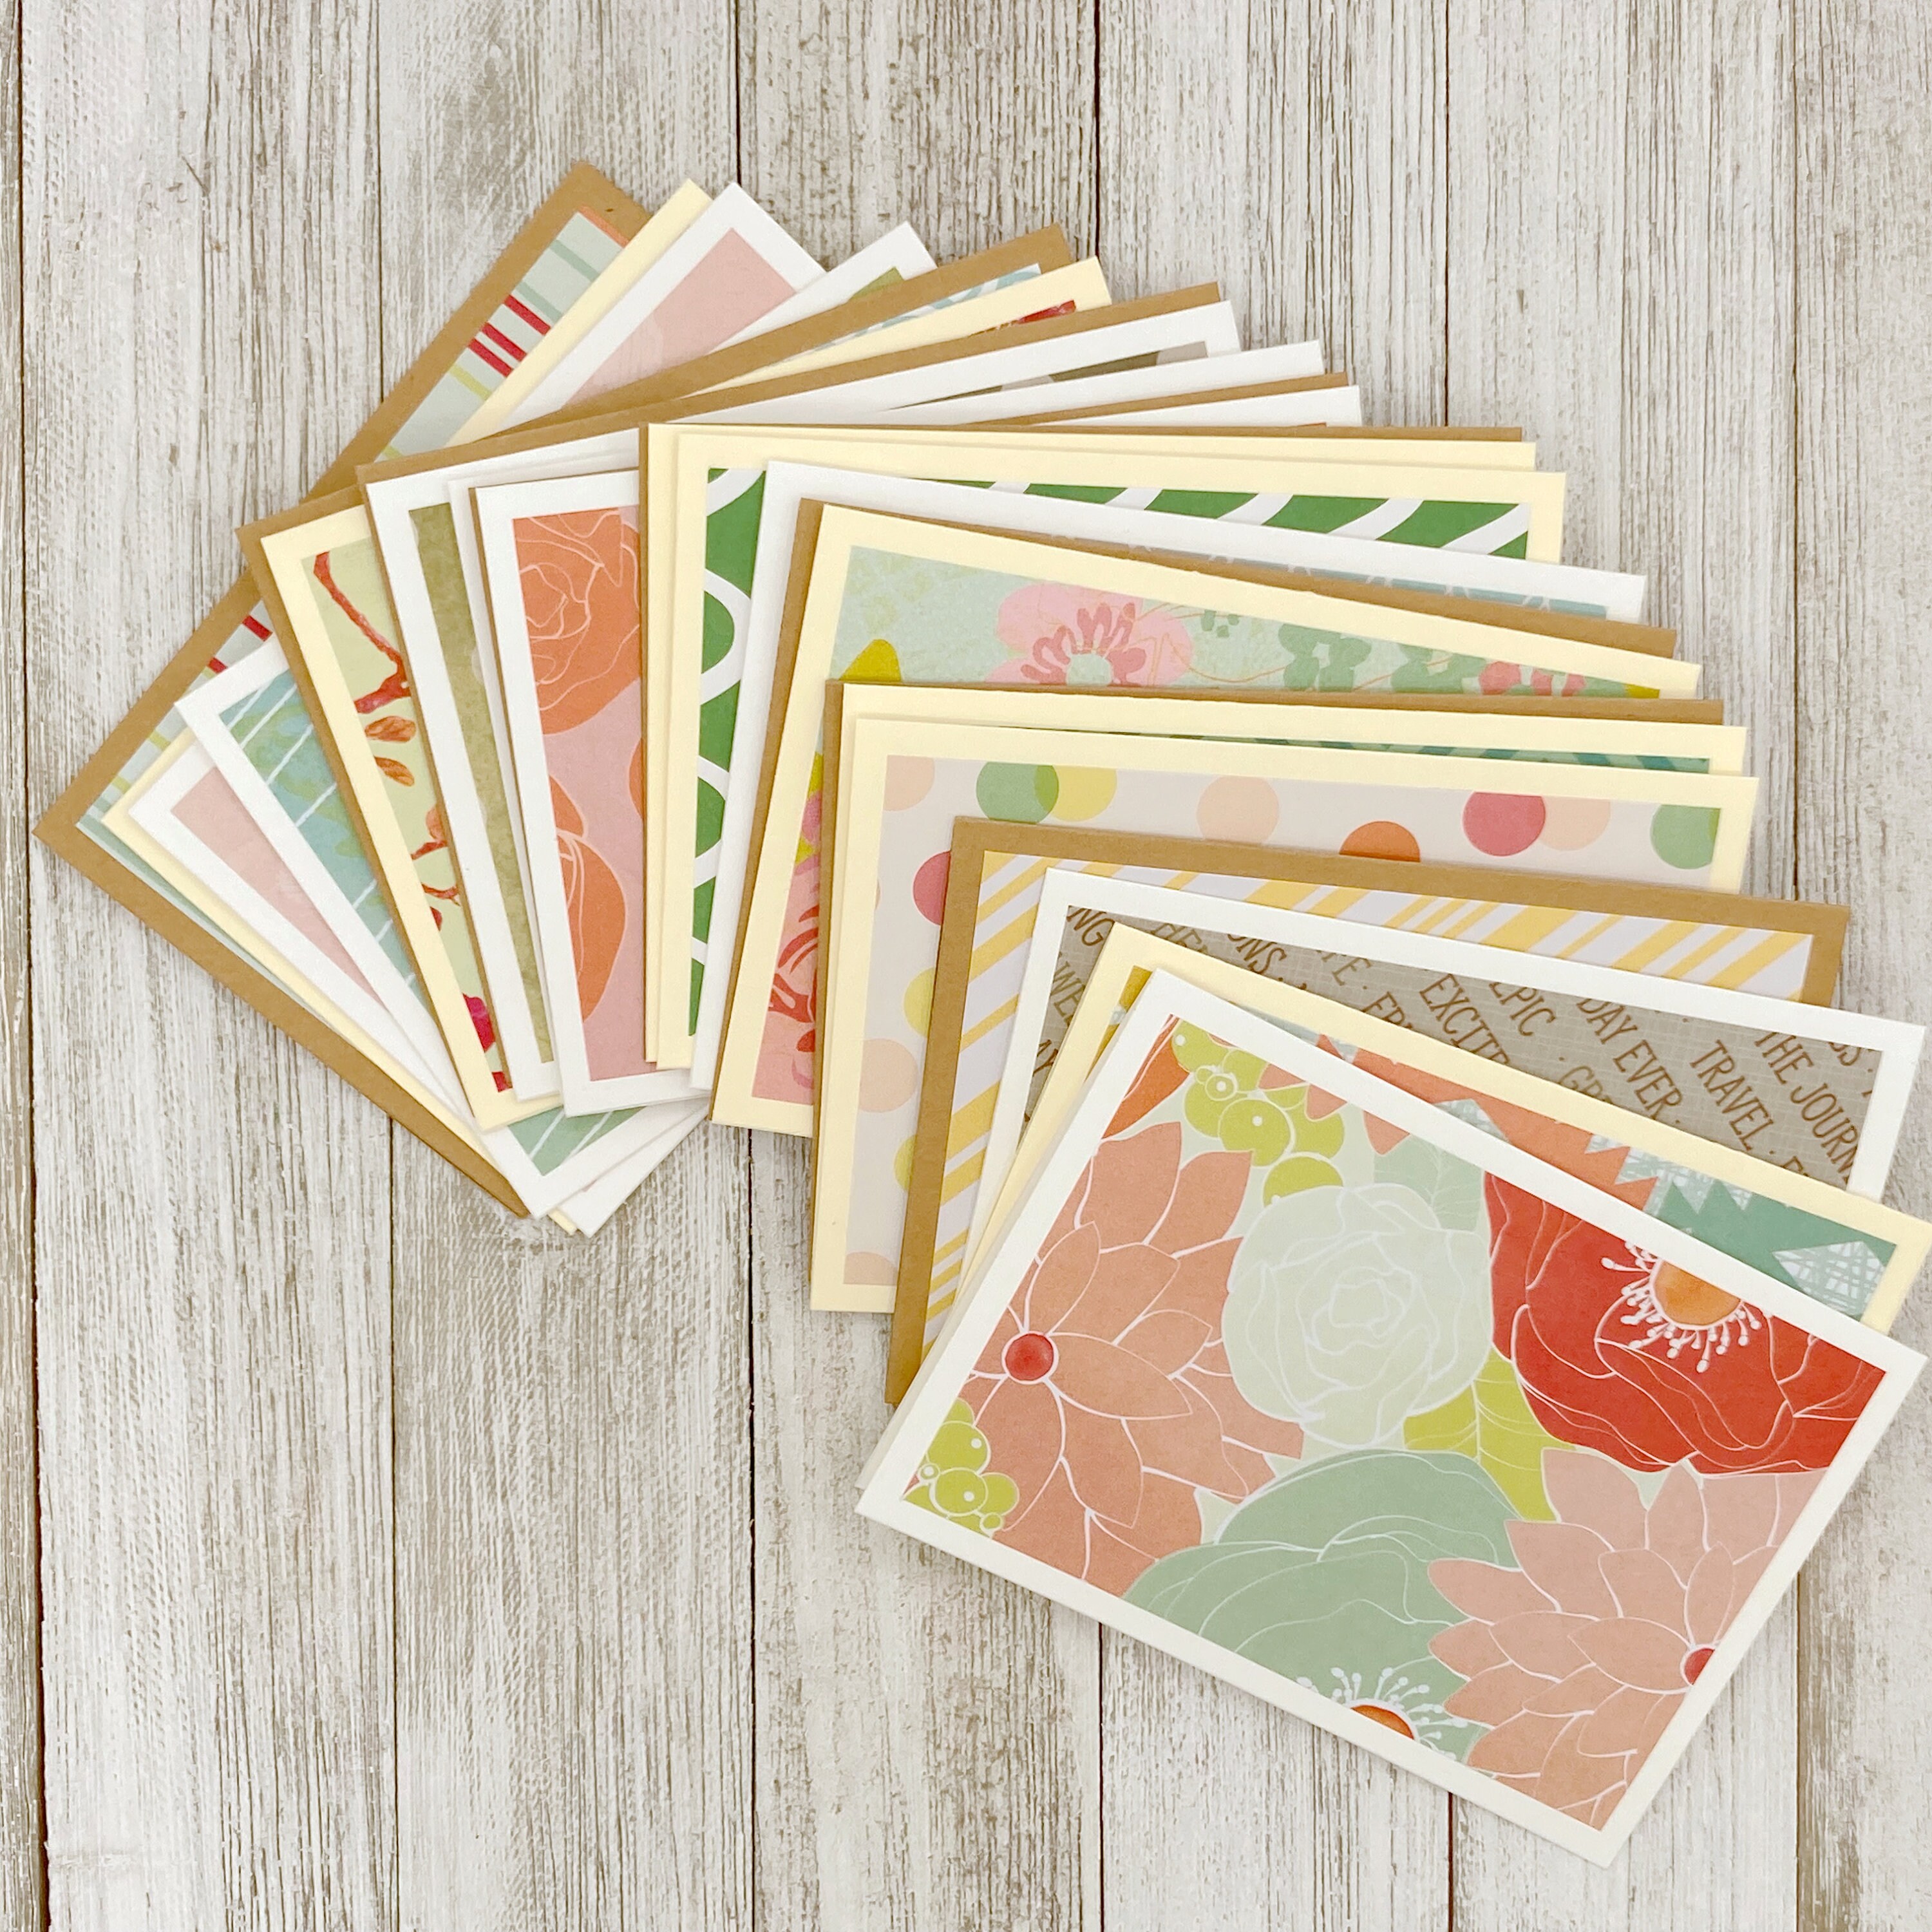 4 Bar Assorted Note Cards / Kraft/ Cream/ White Fold Cards With RANDOM  Patterns/ 4 Bar Note Cards / Small Note Cards 